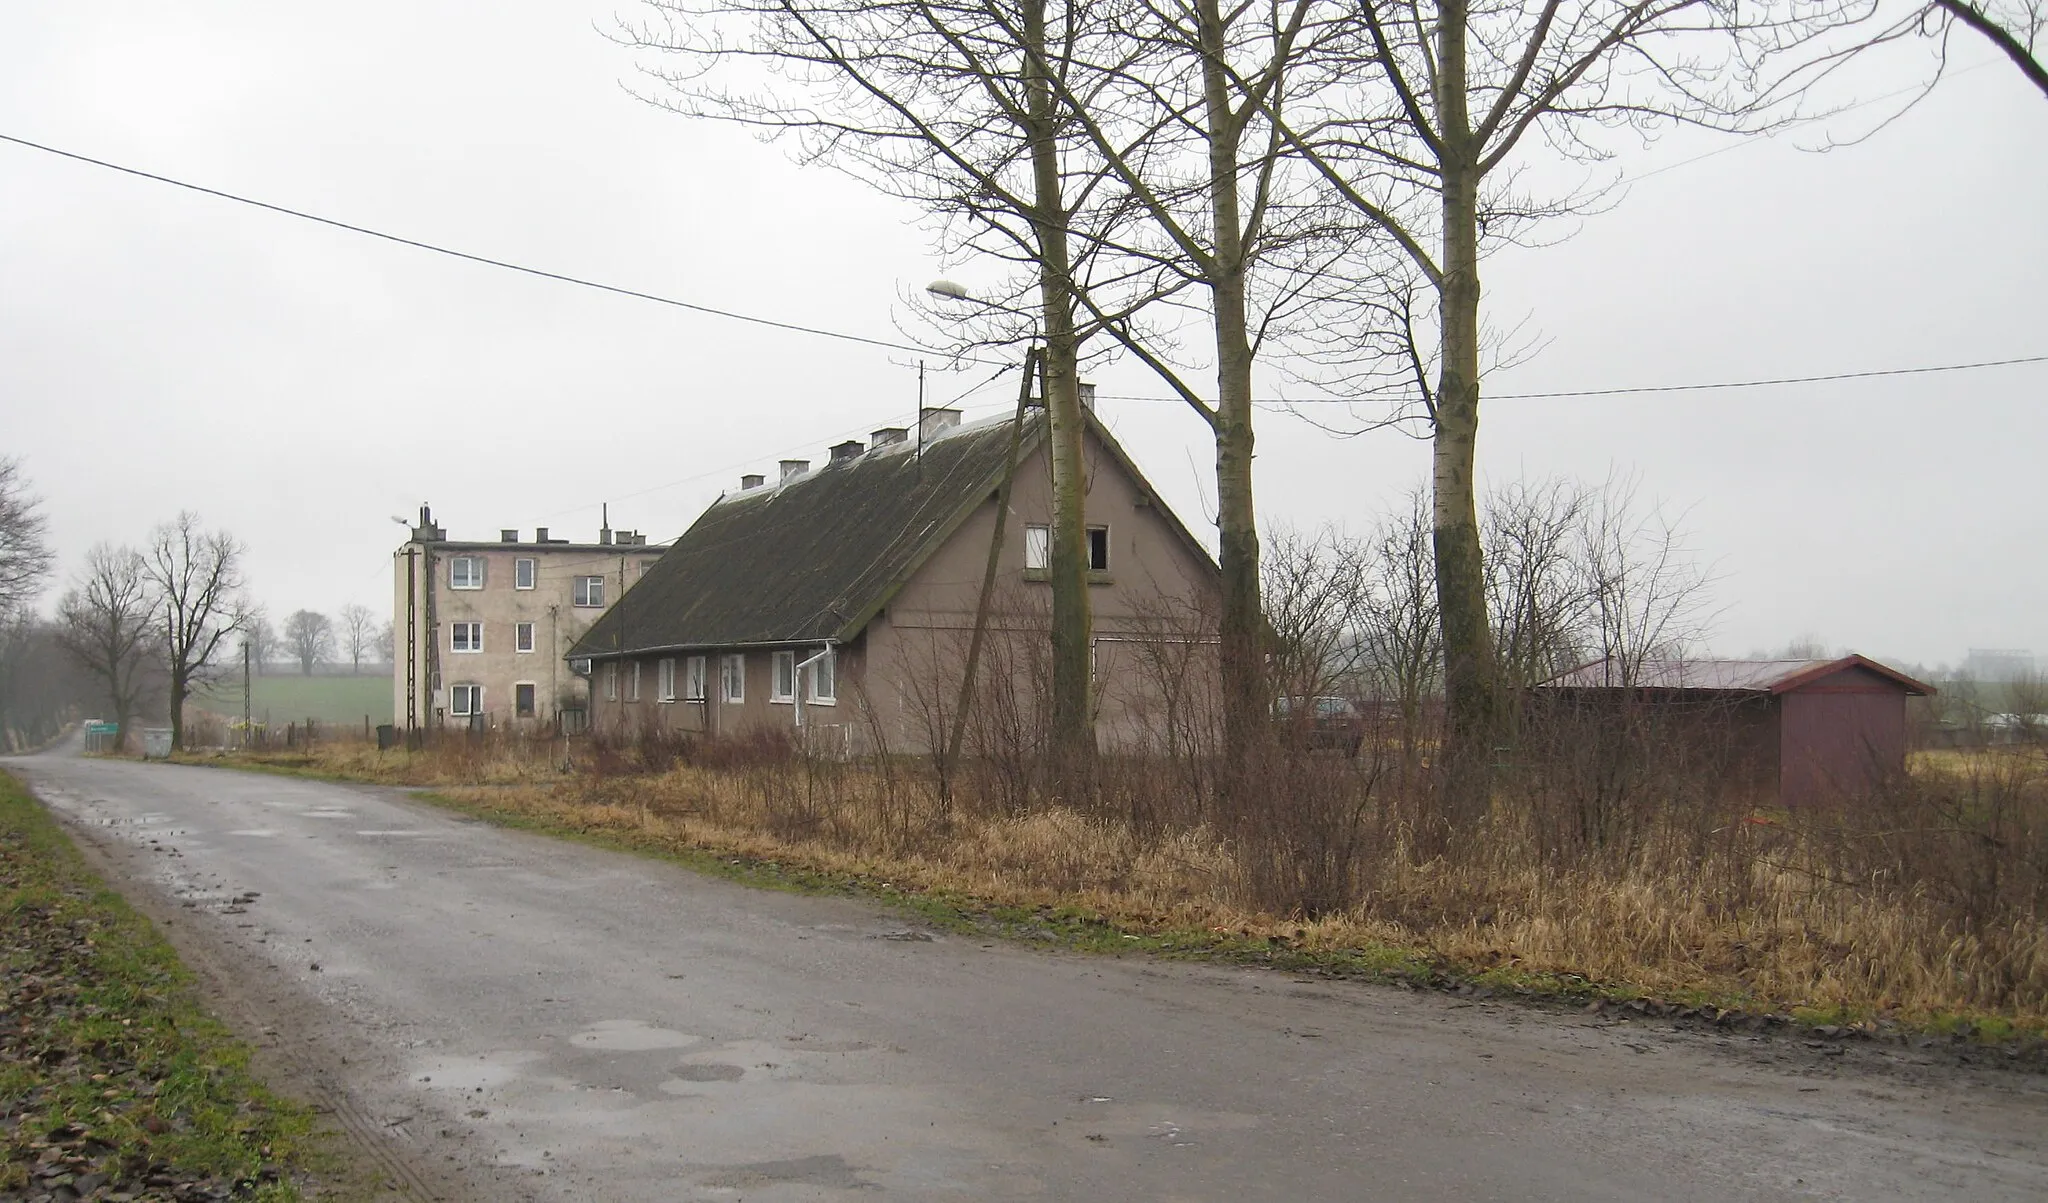 Photo showing: The village Kiemławki Wielkie in Poland

Camera location 54° 09′ 07″ N, 21° 19′ 58″ E View this and other nearby images on: OpenStreetMap 54.151944;   21.332778